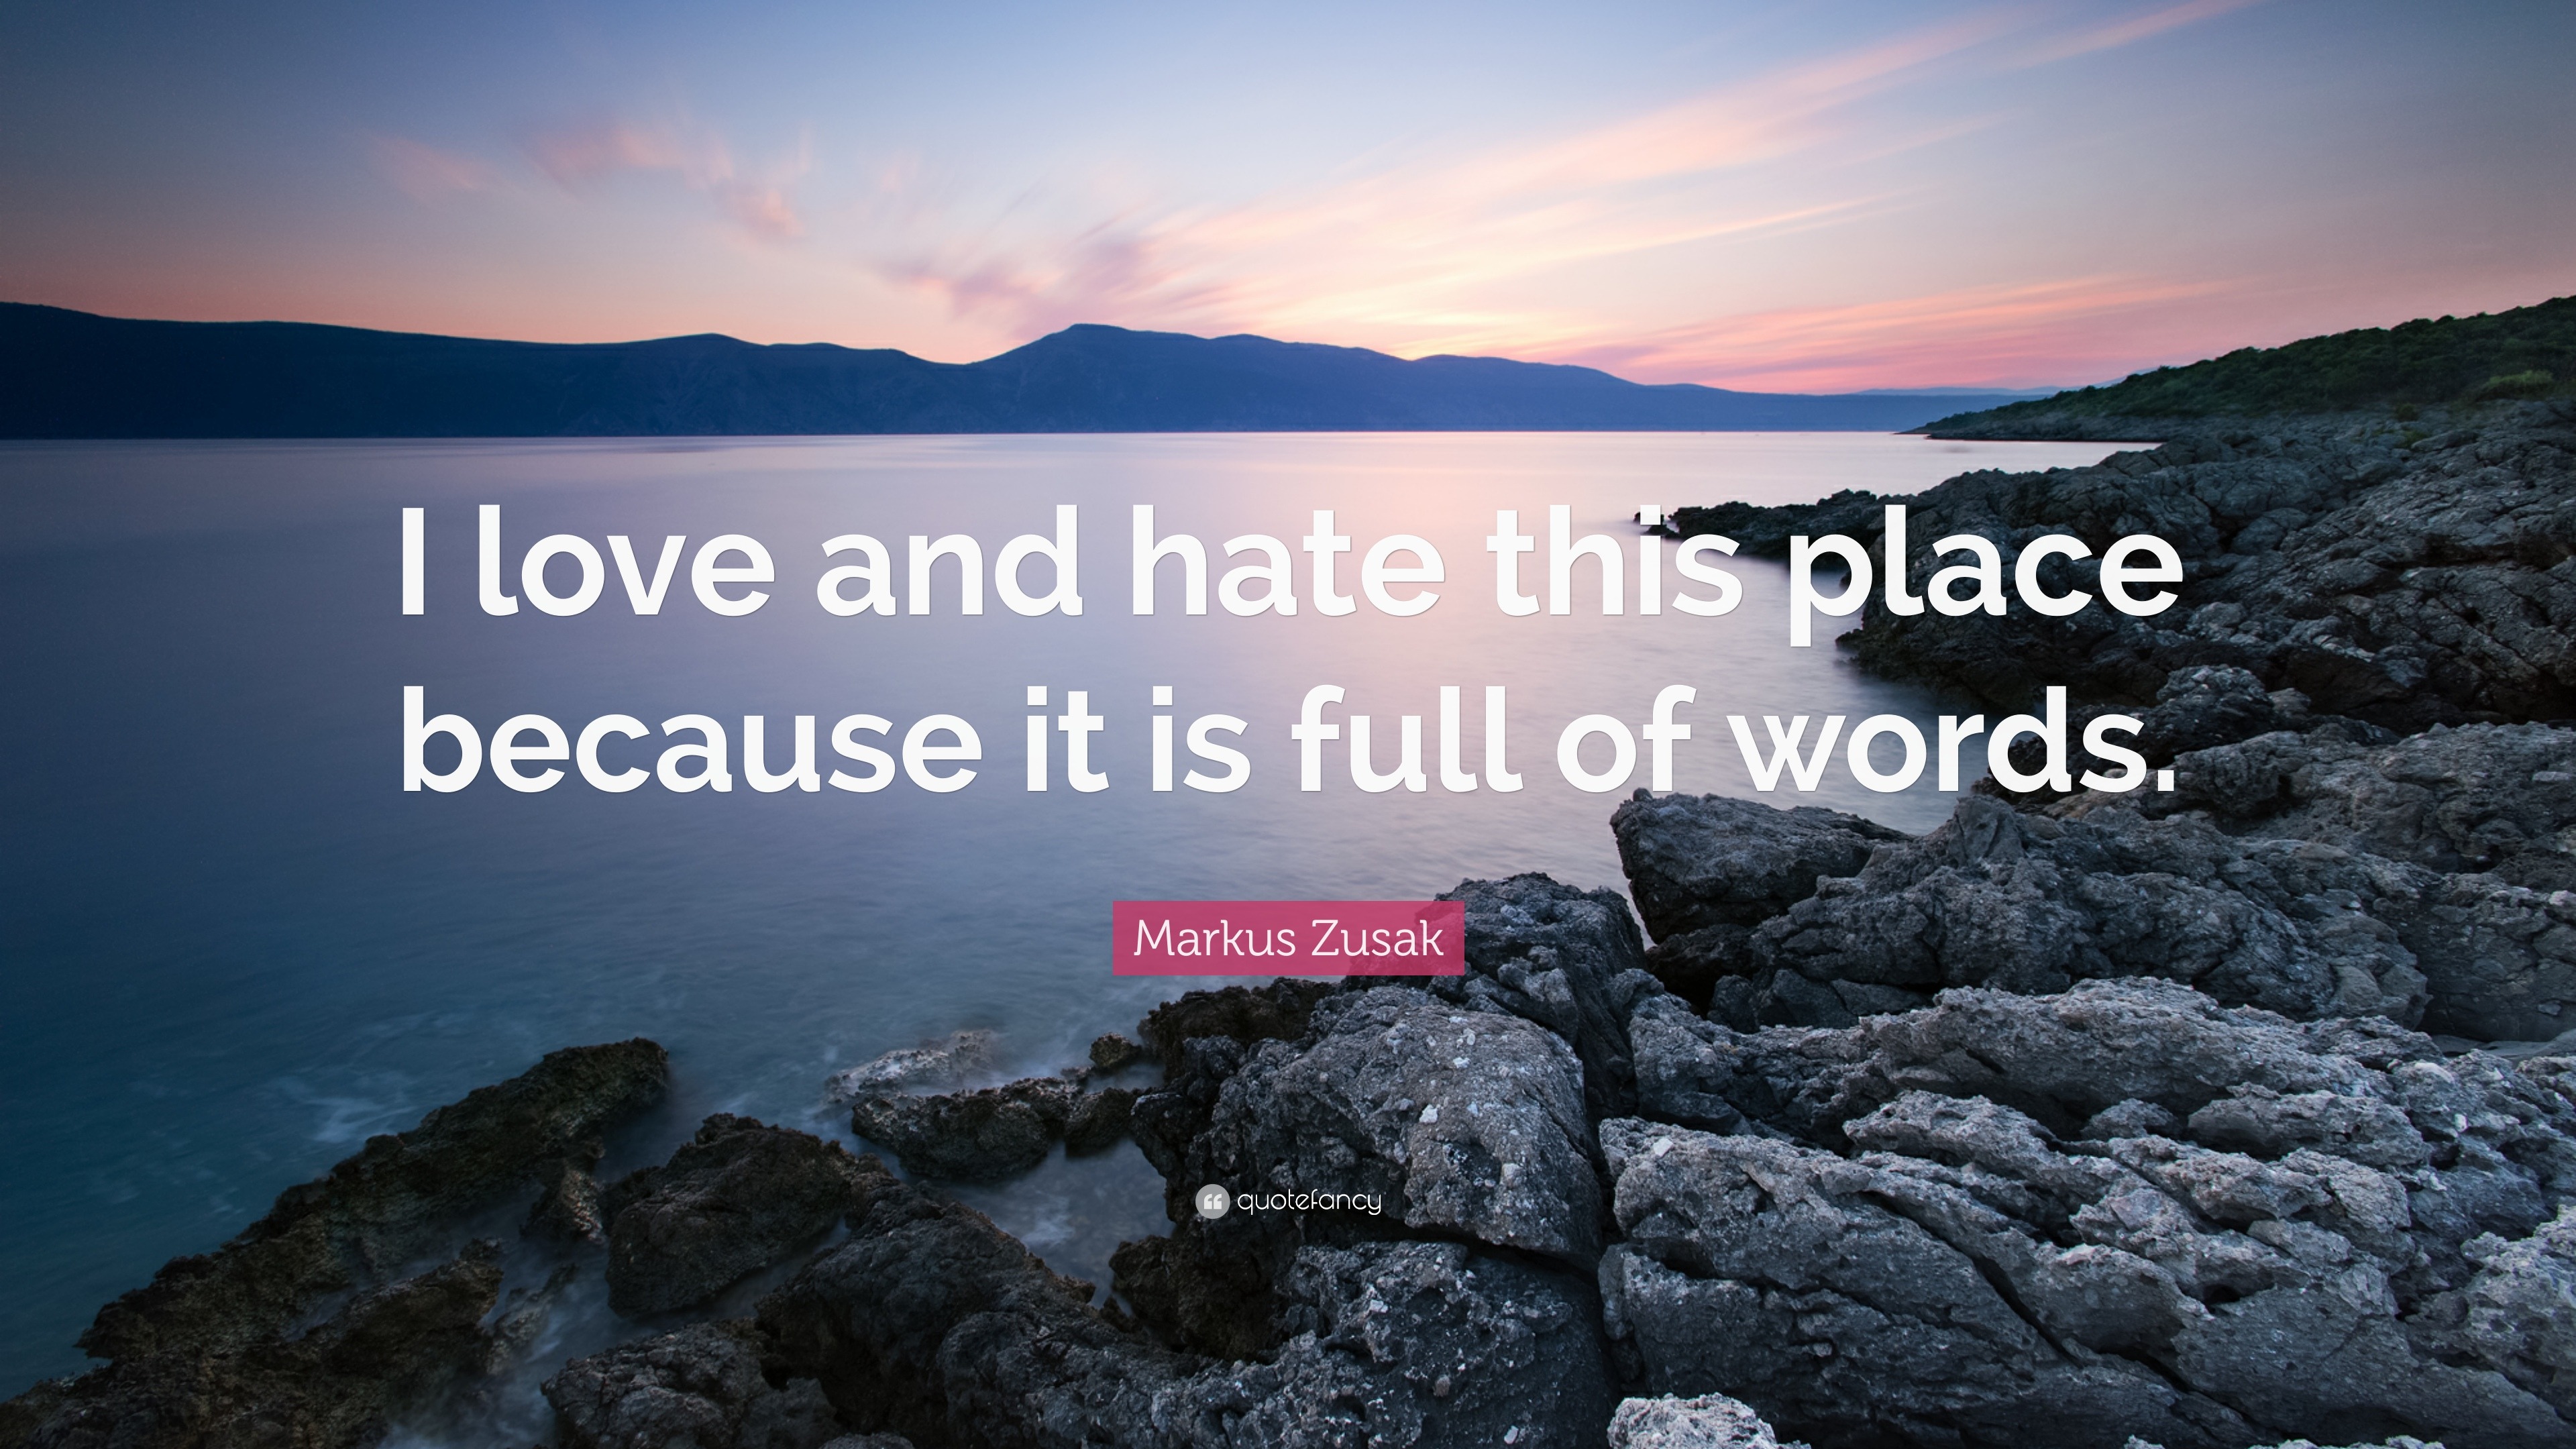 Markus Zusak Quote: “I love and hate this place because it is full of  words.”